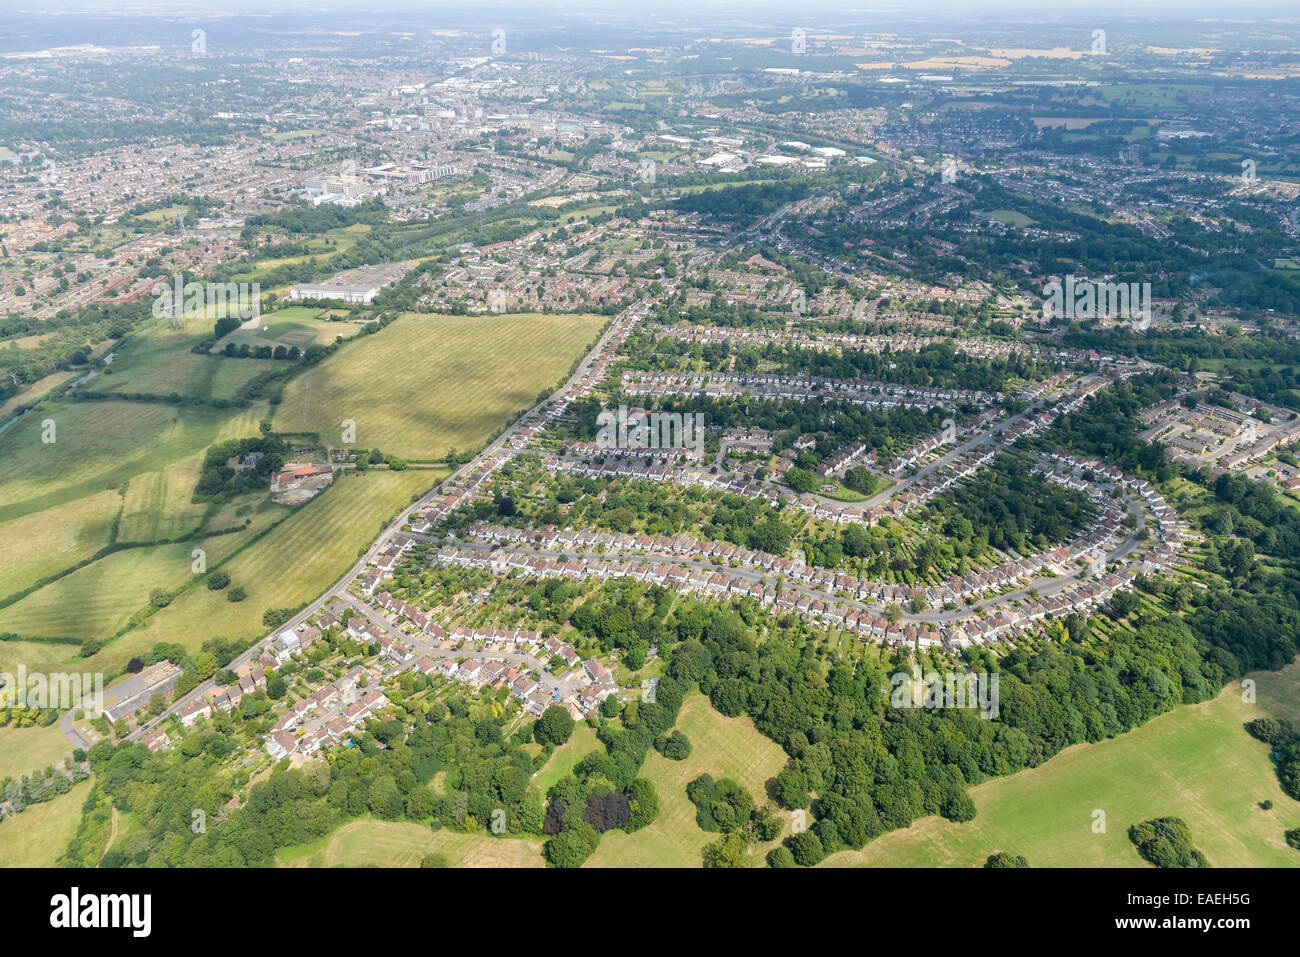 An aerial view showing suburban housing south of Watford with the town visible in the background. Stock Photo